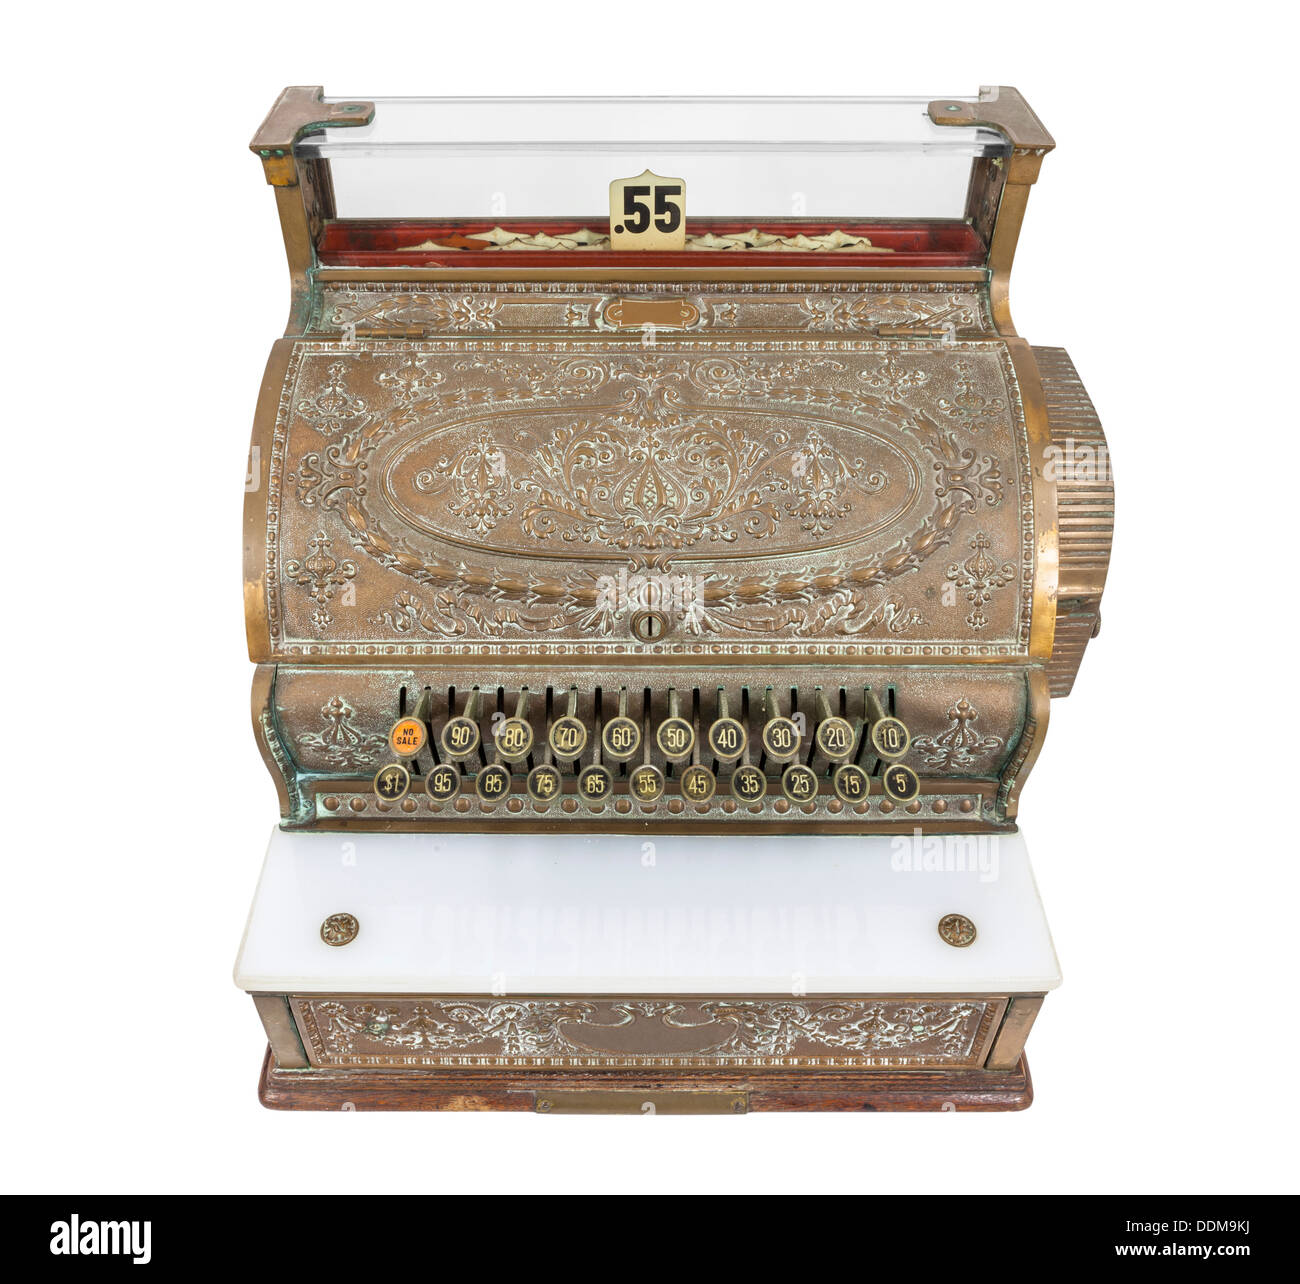 Vintage cash register isolated with clipping path. Stock Photo